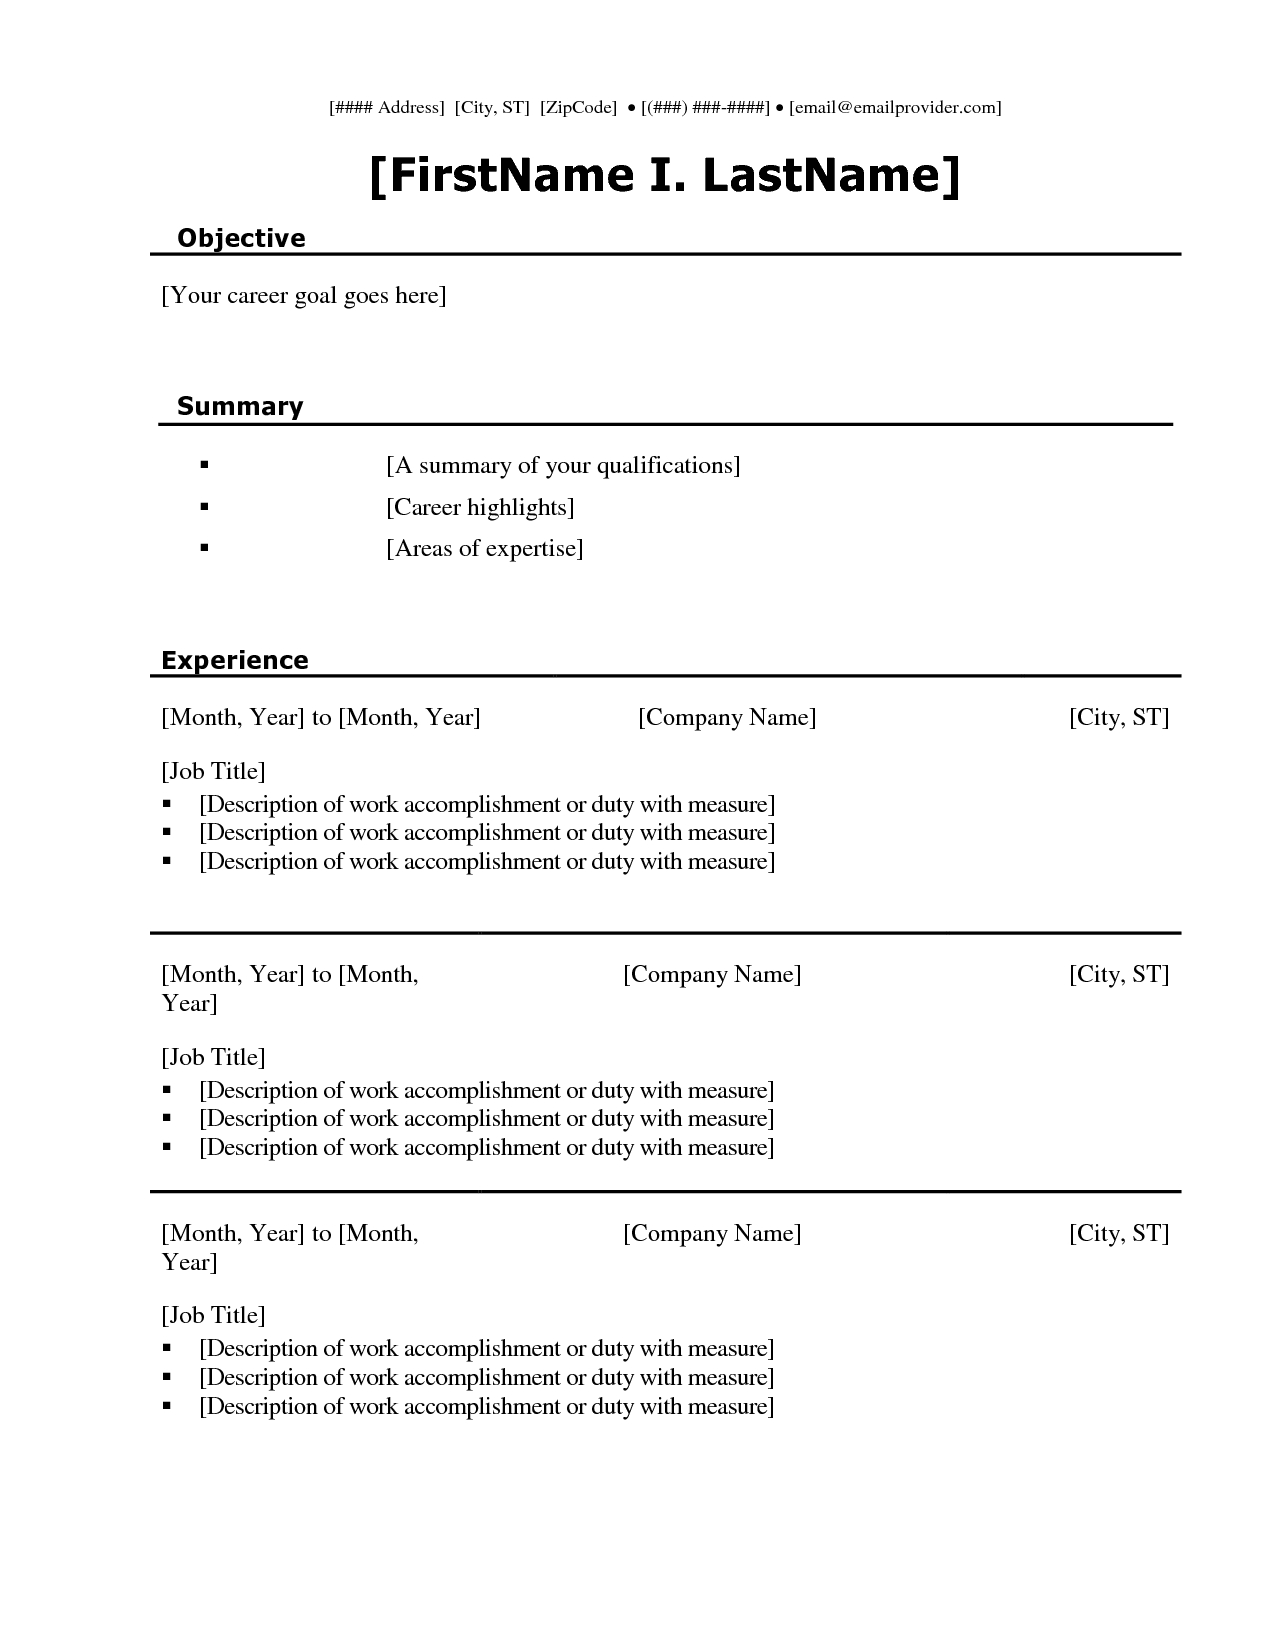 022 Microsoft Word Templates A49Vxtgh Resume Template Ms Intended For Free Blank Resume Templates For Microsoft Word